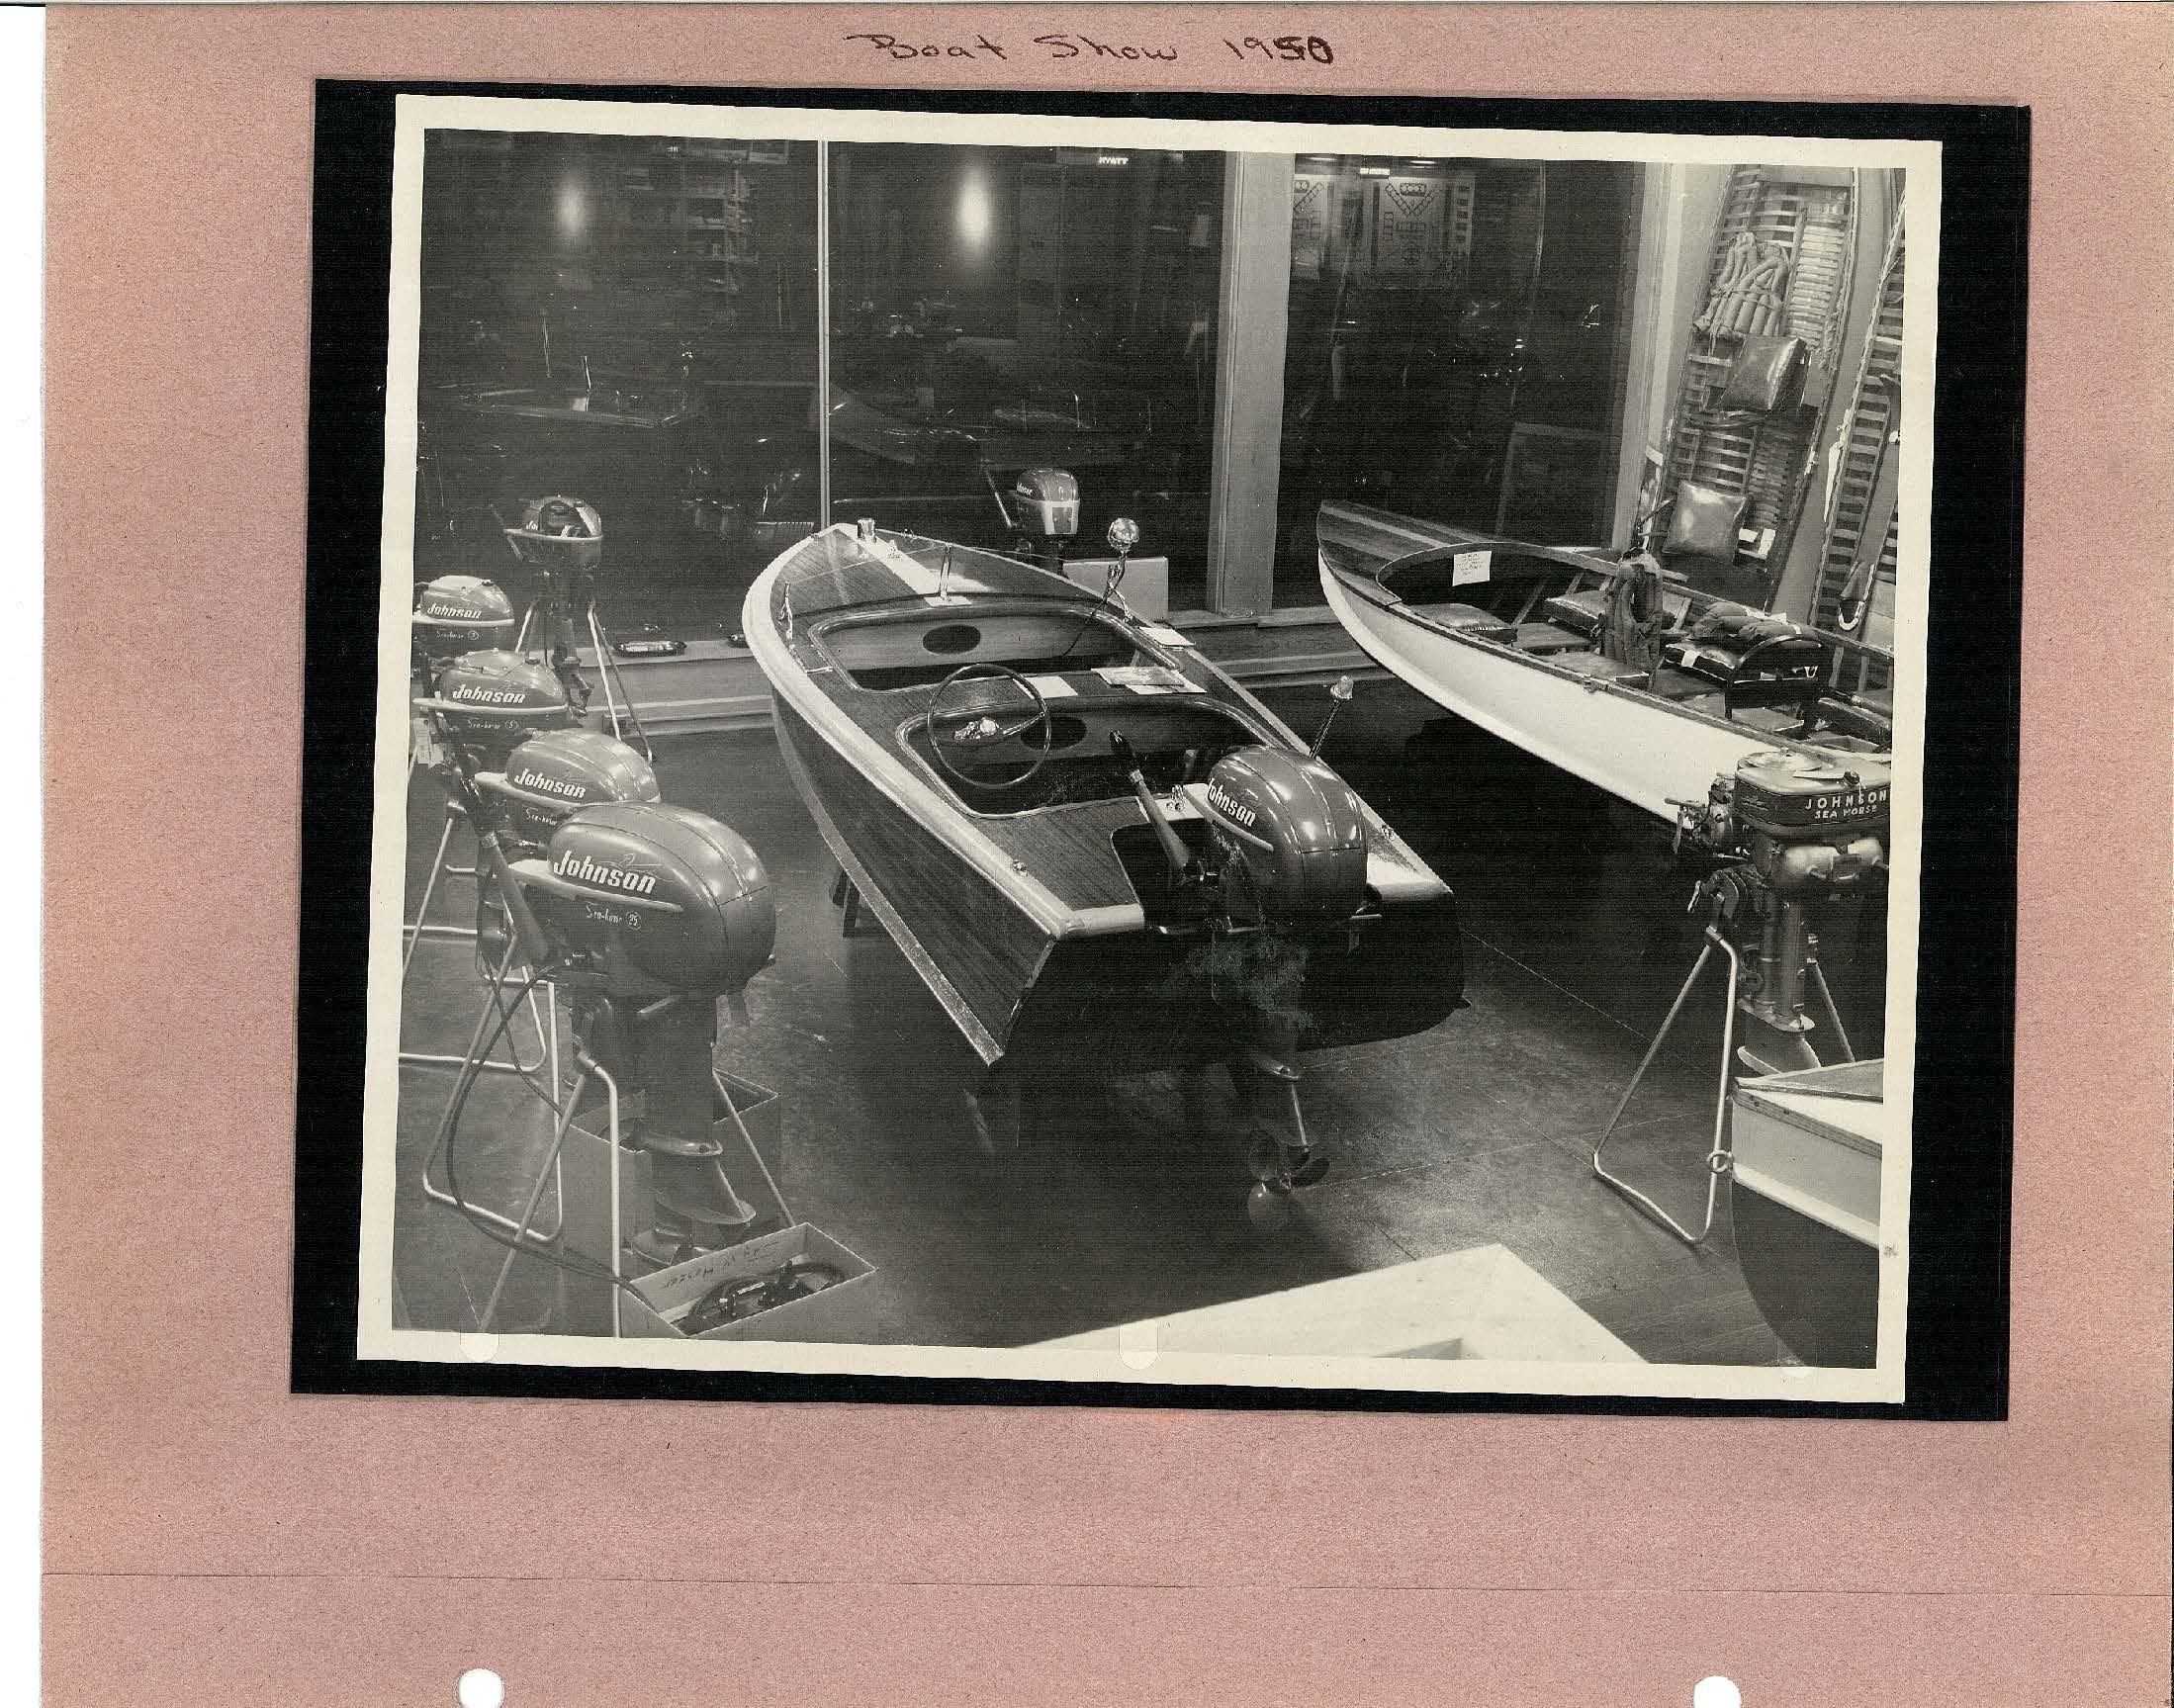 Photo taken at Boat show 1950 of small boats